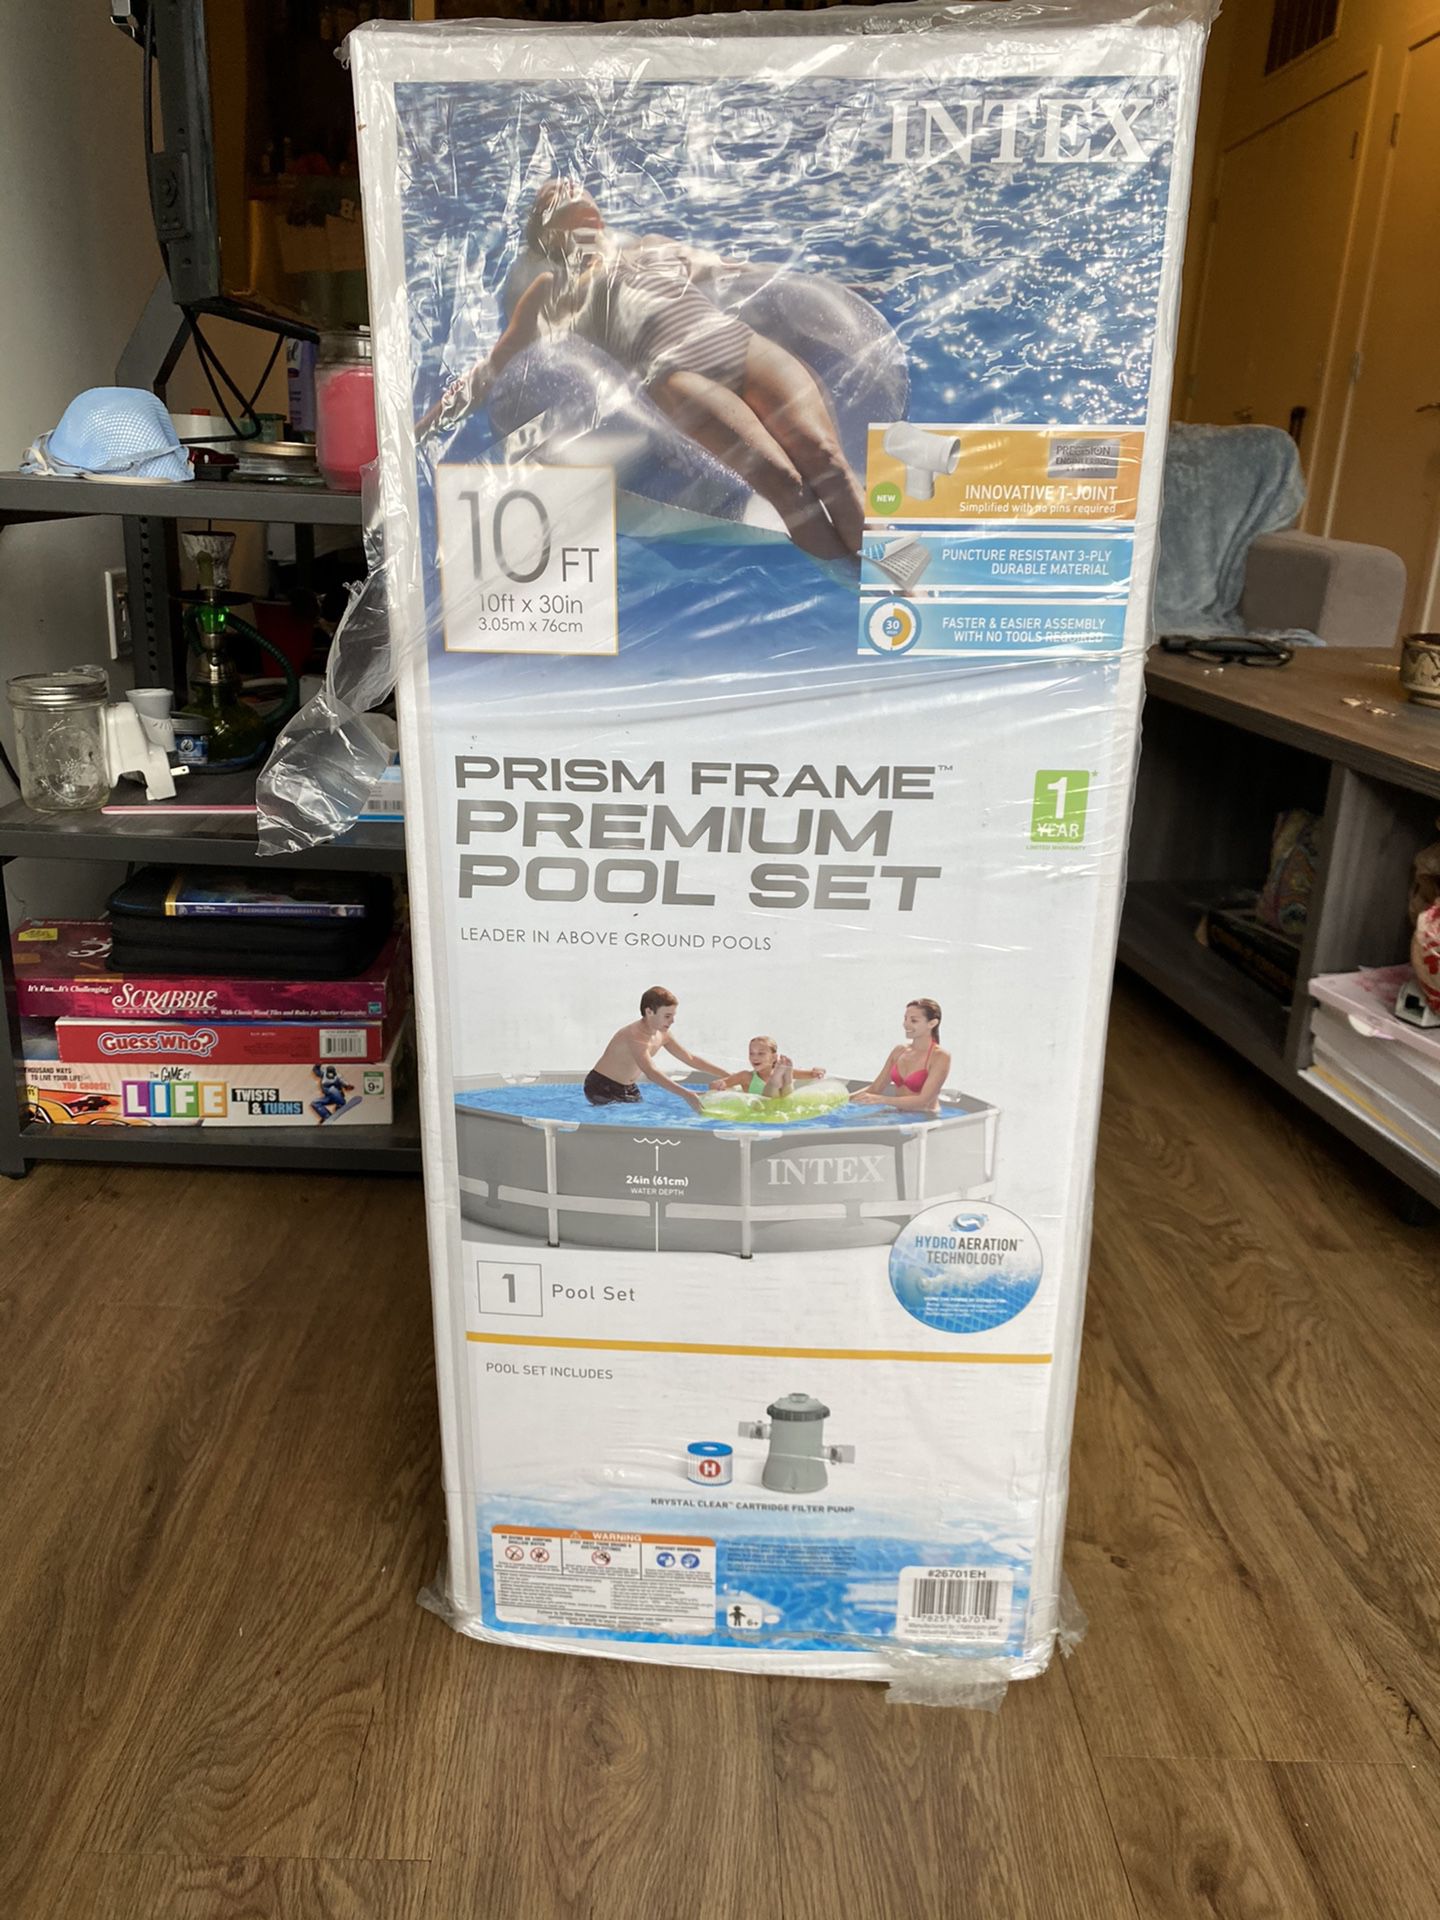 NEW Intex 10’ x 30” Prism Frame Above Ground Pool Set with Pump IN HAND